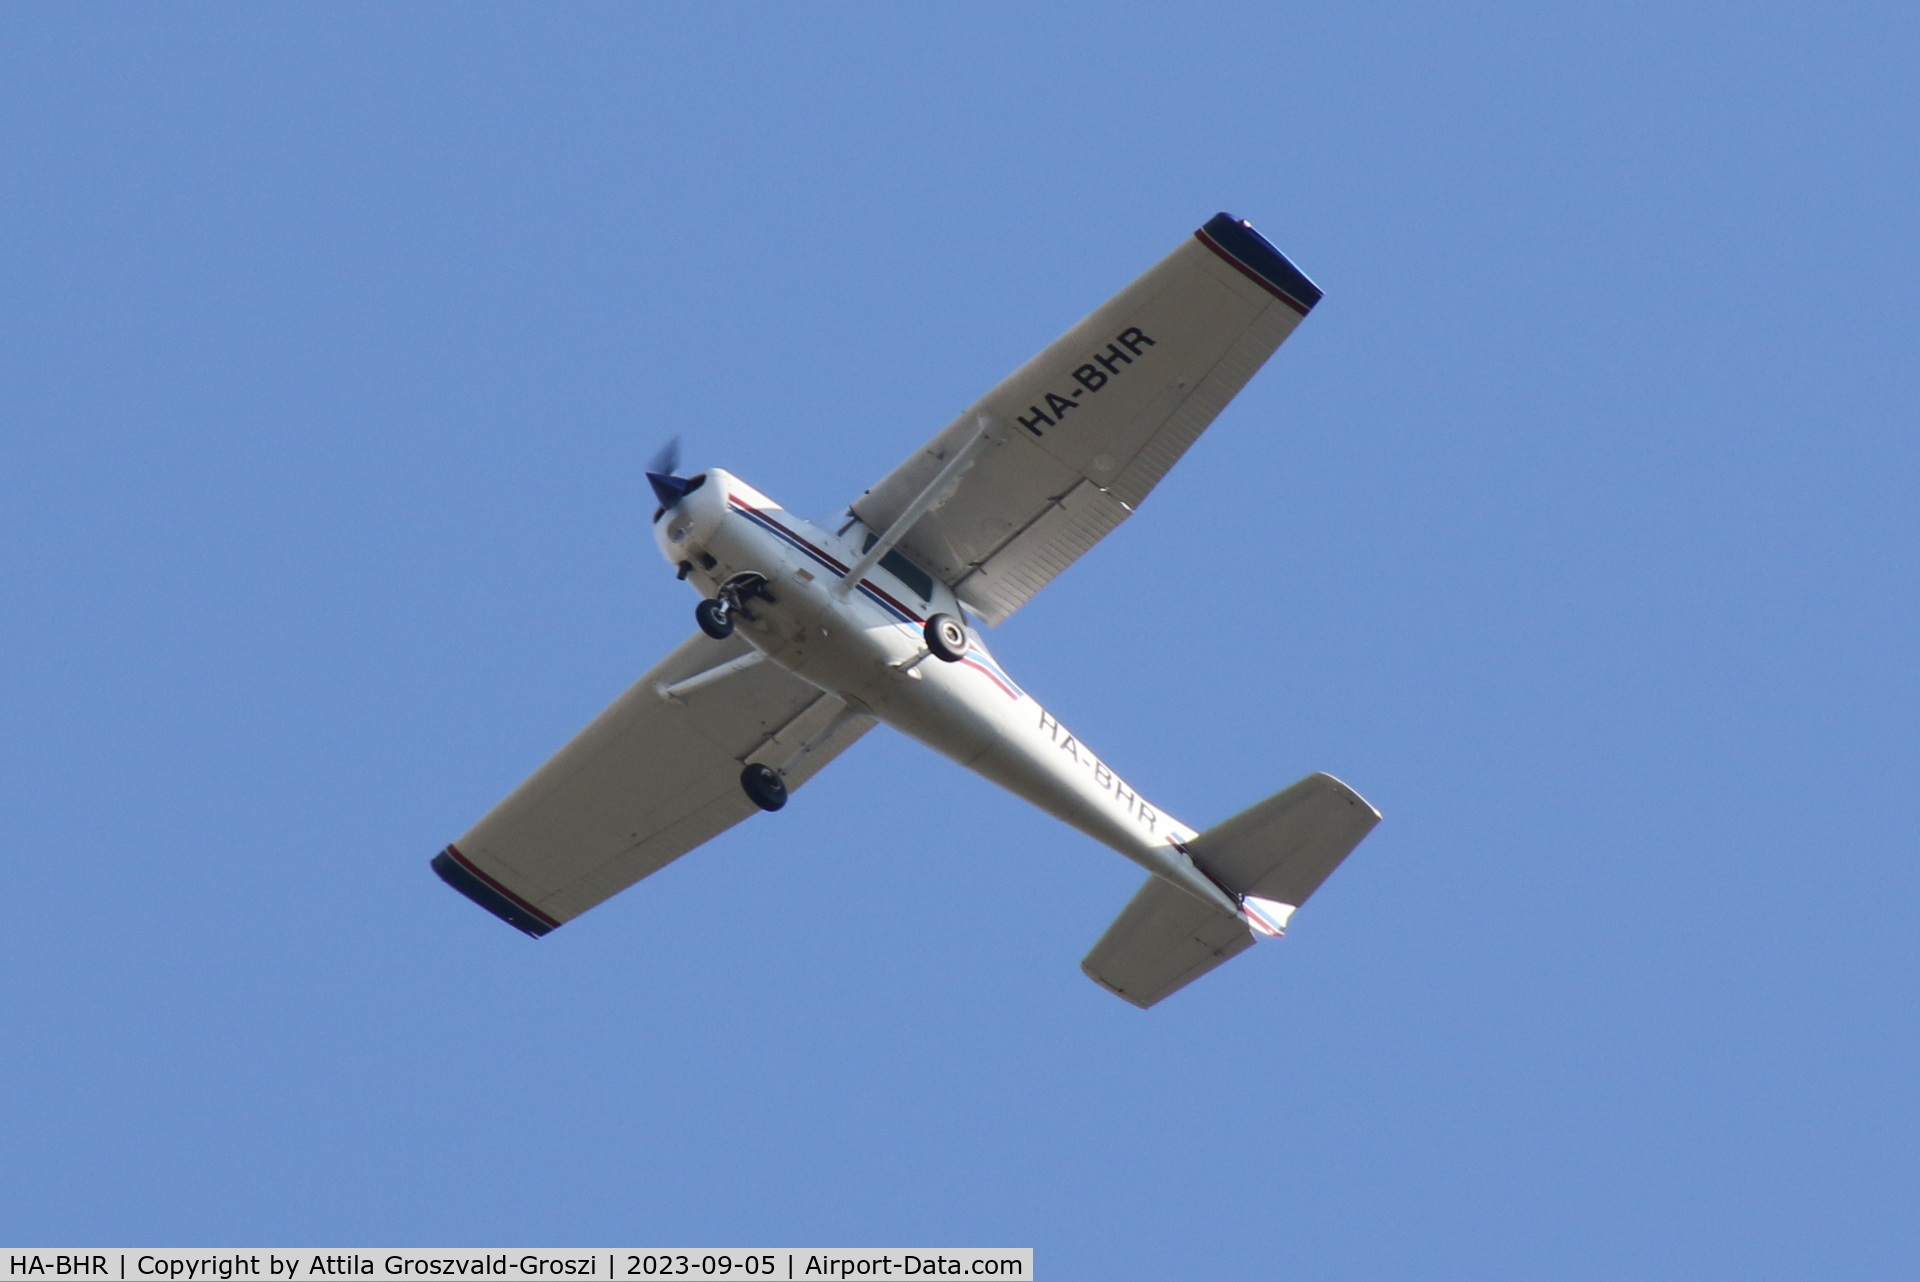 HA-BHR, 1978 Cessna 152 C/N 152-81906, in the airspace of Veszprém city, Hungary